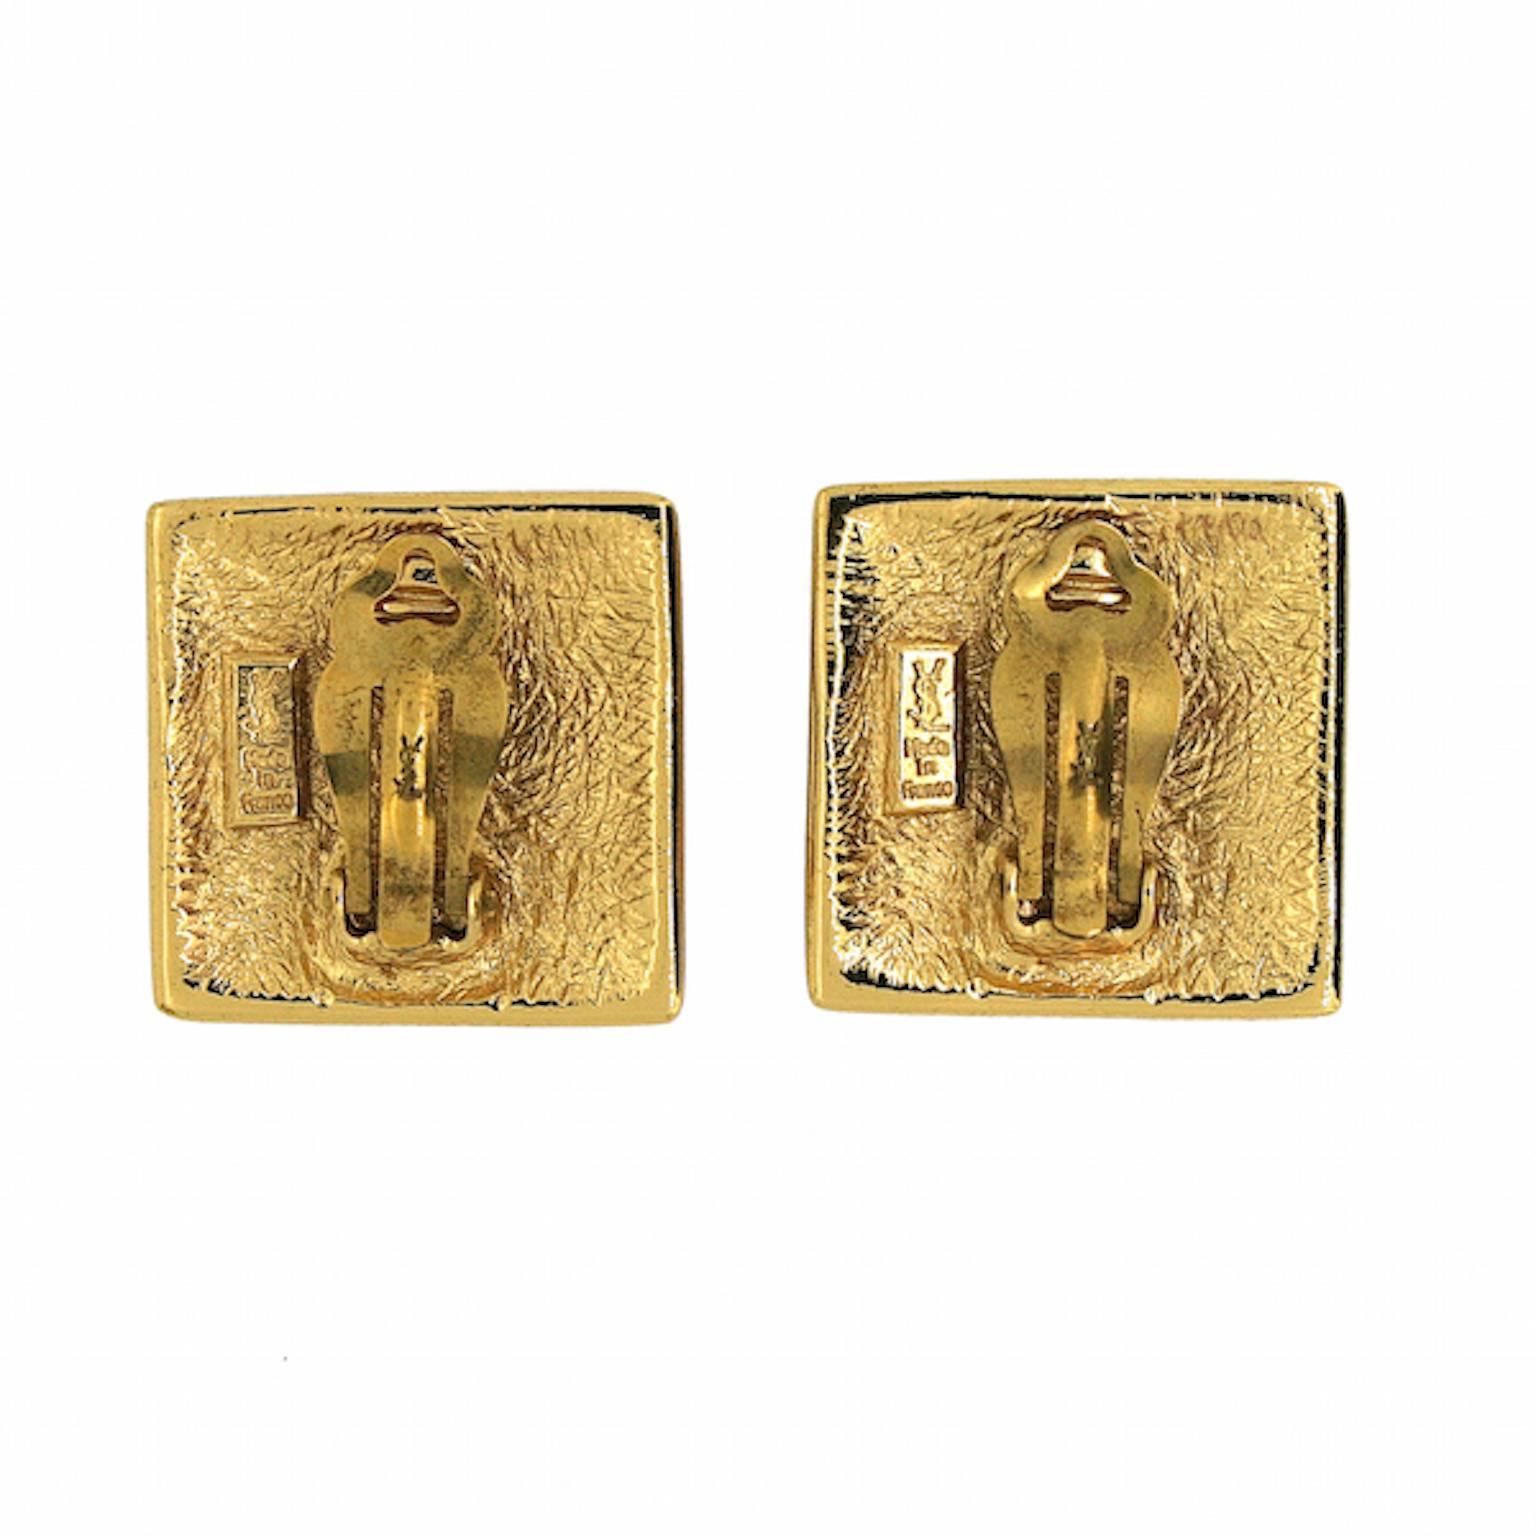 Magnificent and 'high fashion', these earrings are well-crafted example by Yves Saint Laurent. They date from the 1980s and are clip on.
Condition Report:
Excellent
The Details...
These square shaped, gold plated earrings feature a floral design